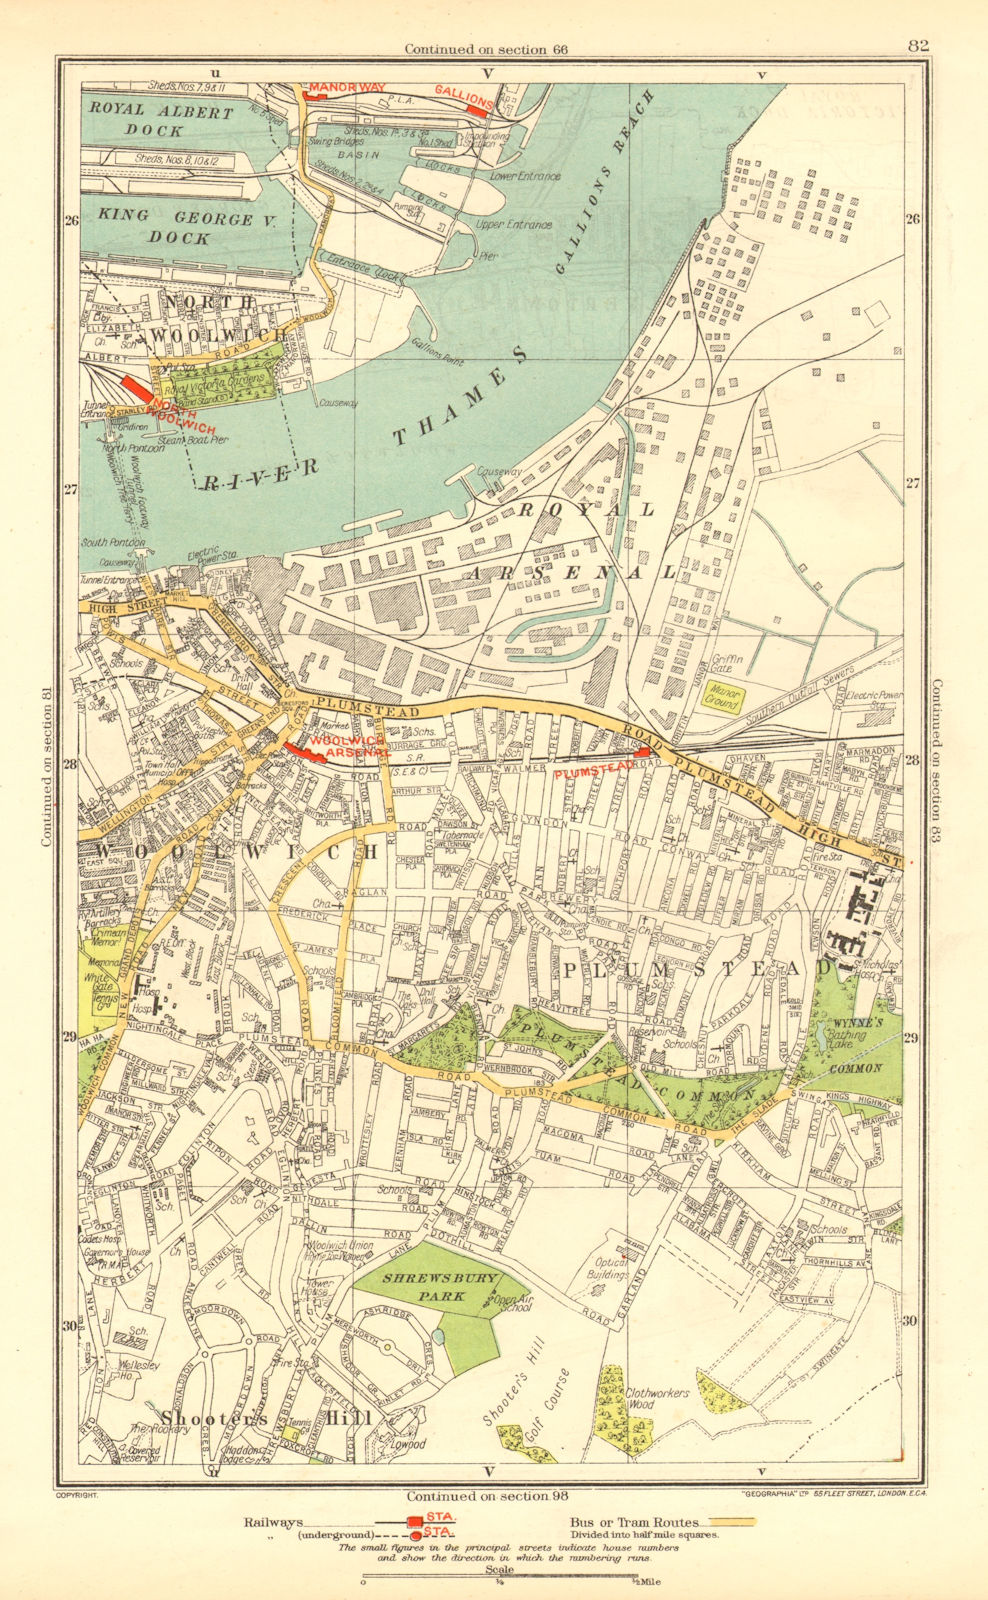 LONDON. North Woolwich Plumstead Gallions Manor Way Woolwich Arsenal 1937 map